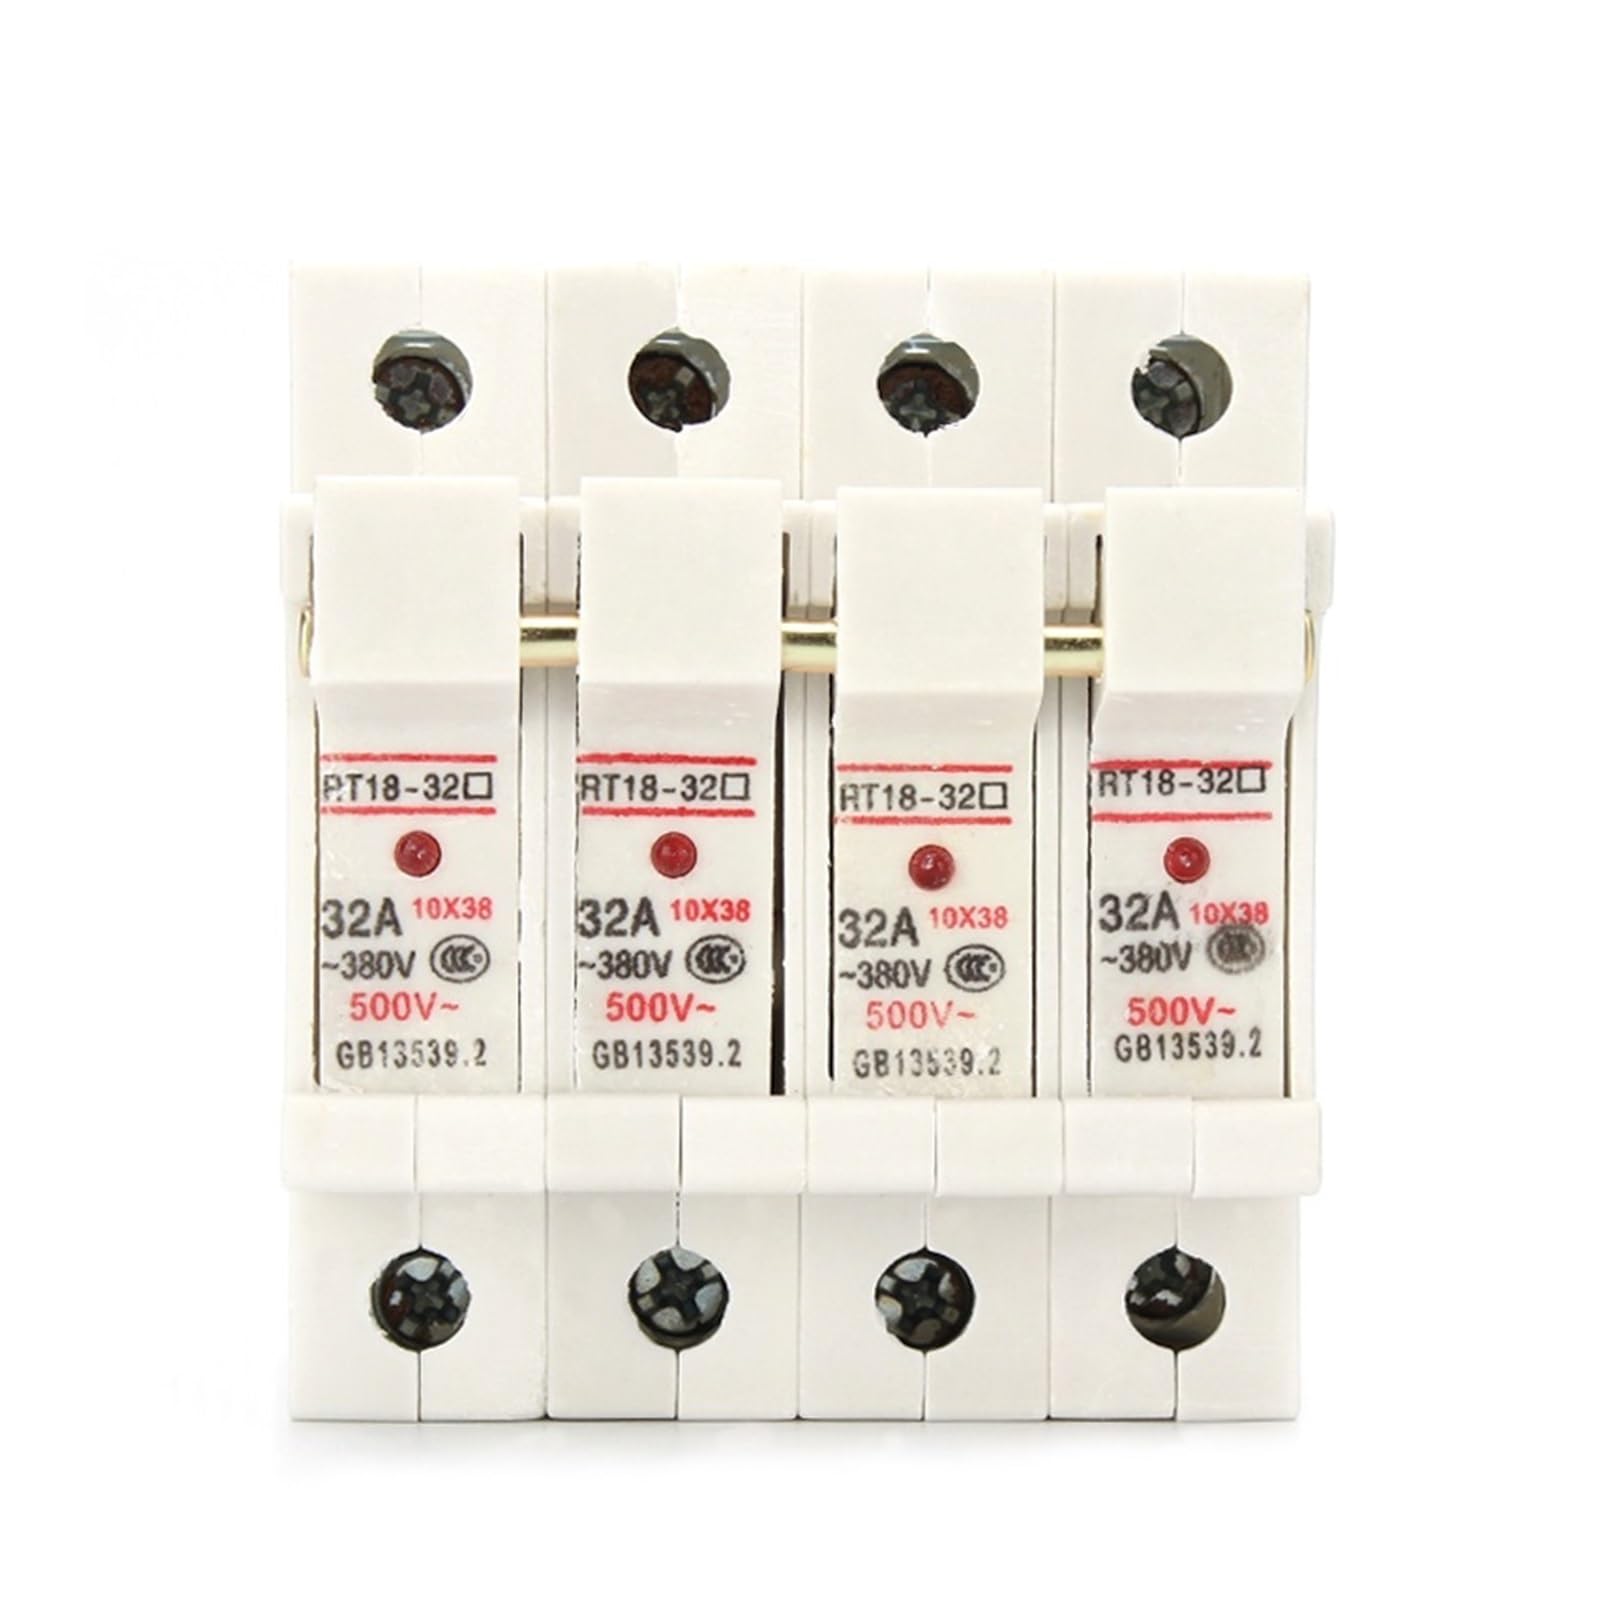 1P 2P 3P 4P RT18-32X AC ~380V Copper Fuse Holder 500V 10x38mm DIN rail mounting Fuse holder bottom adapter with Fuse RUAJOGYNVM(2A,4P) von RUAJOGYNVM